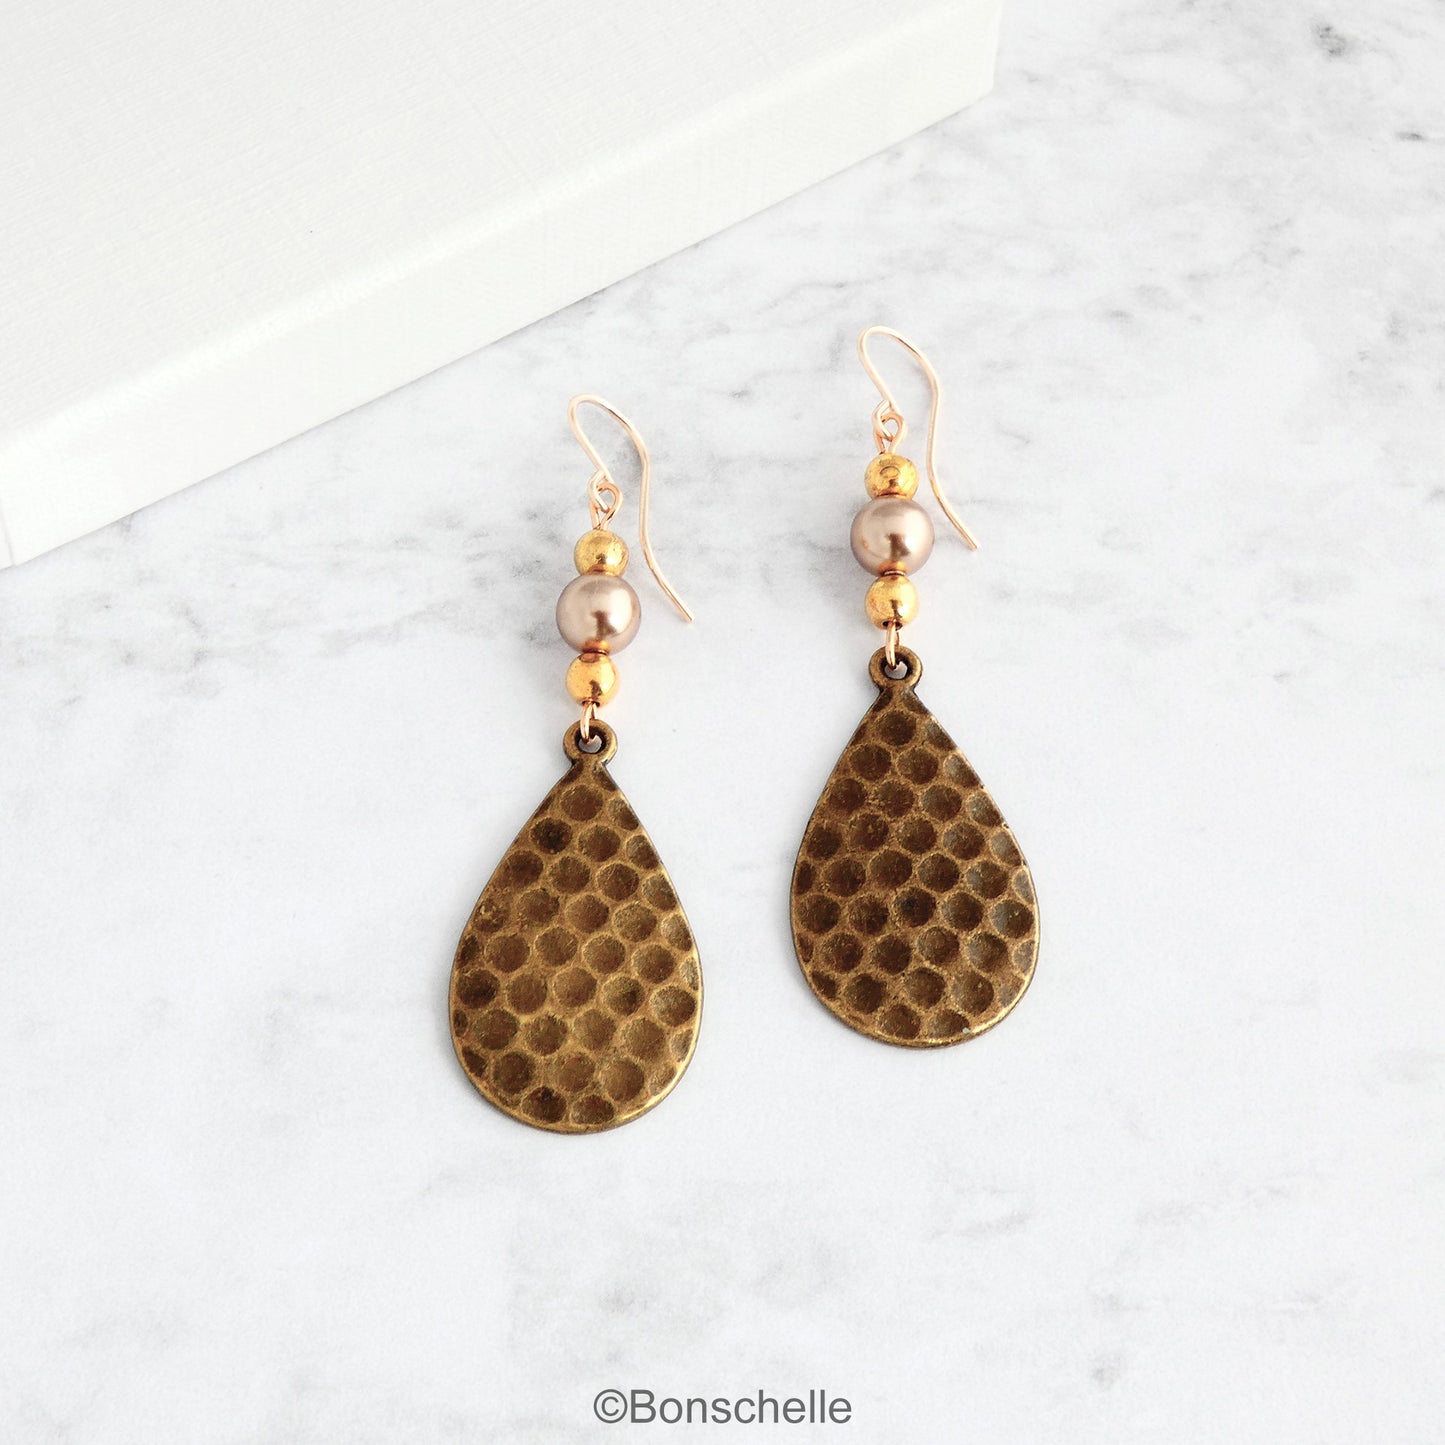 Antique Bronze Hammered Teardrop and Pearl Earrings with 14K Gold Filled Earwires